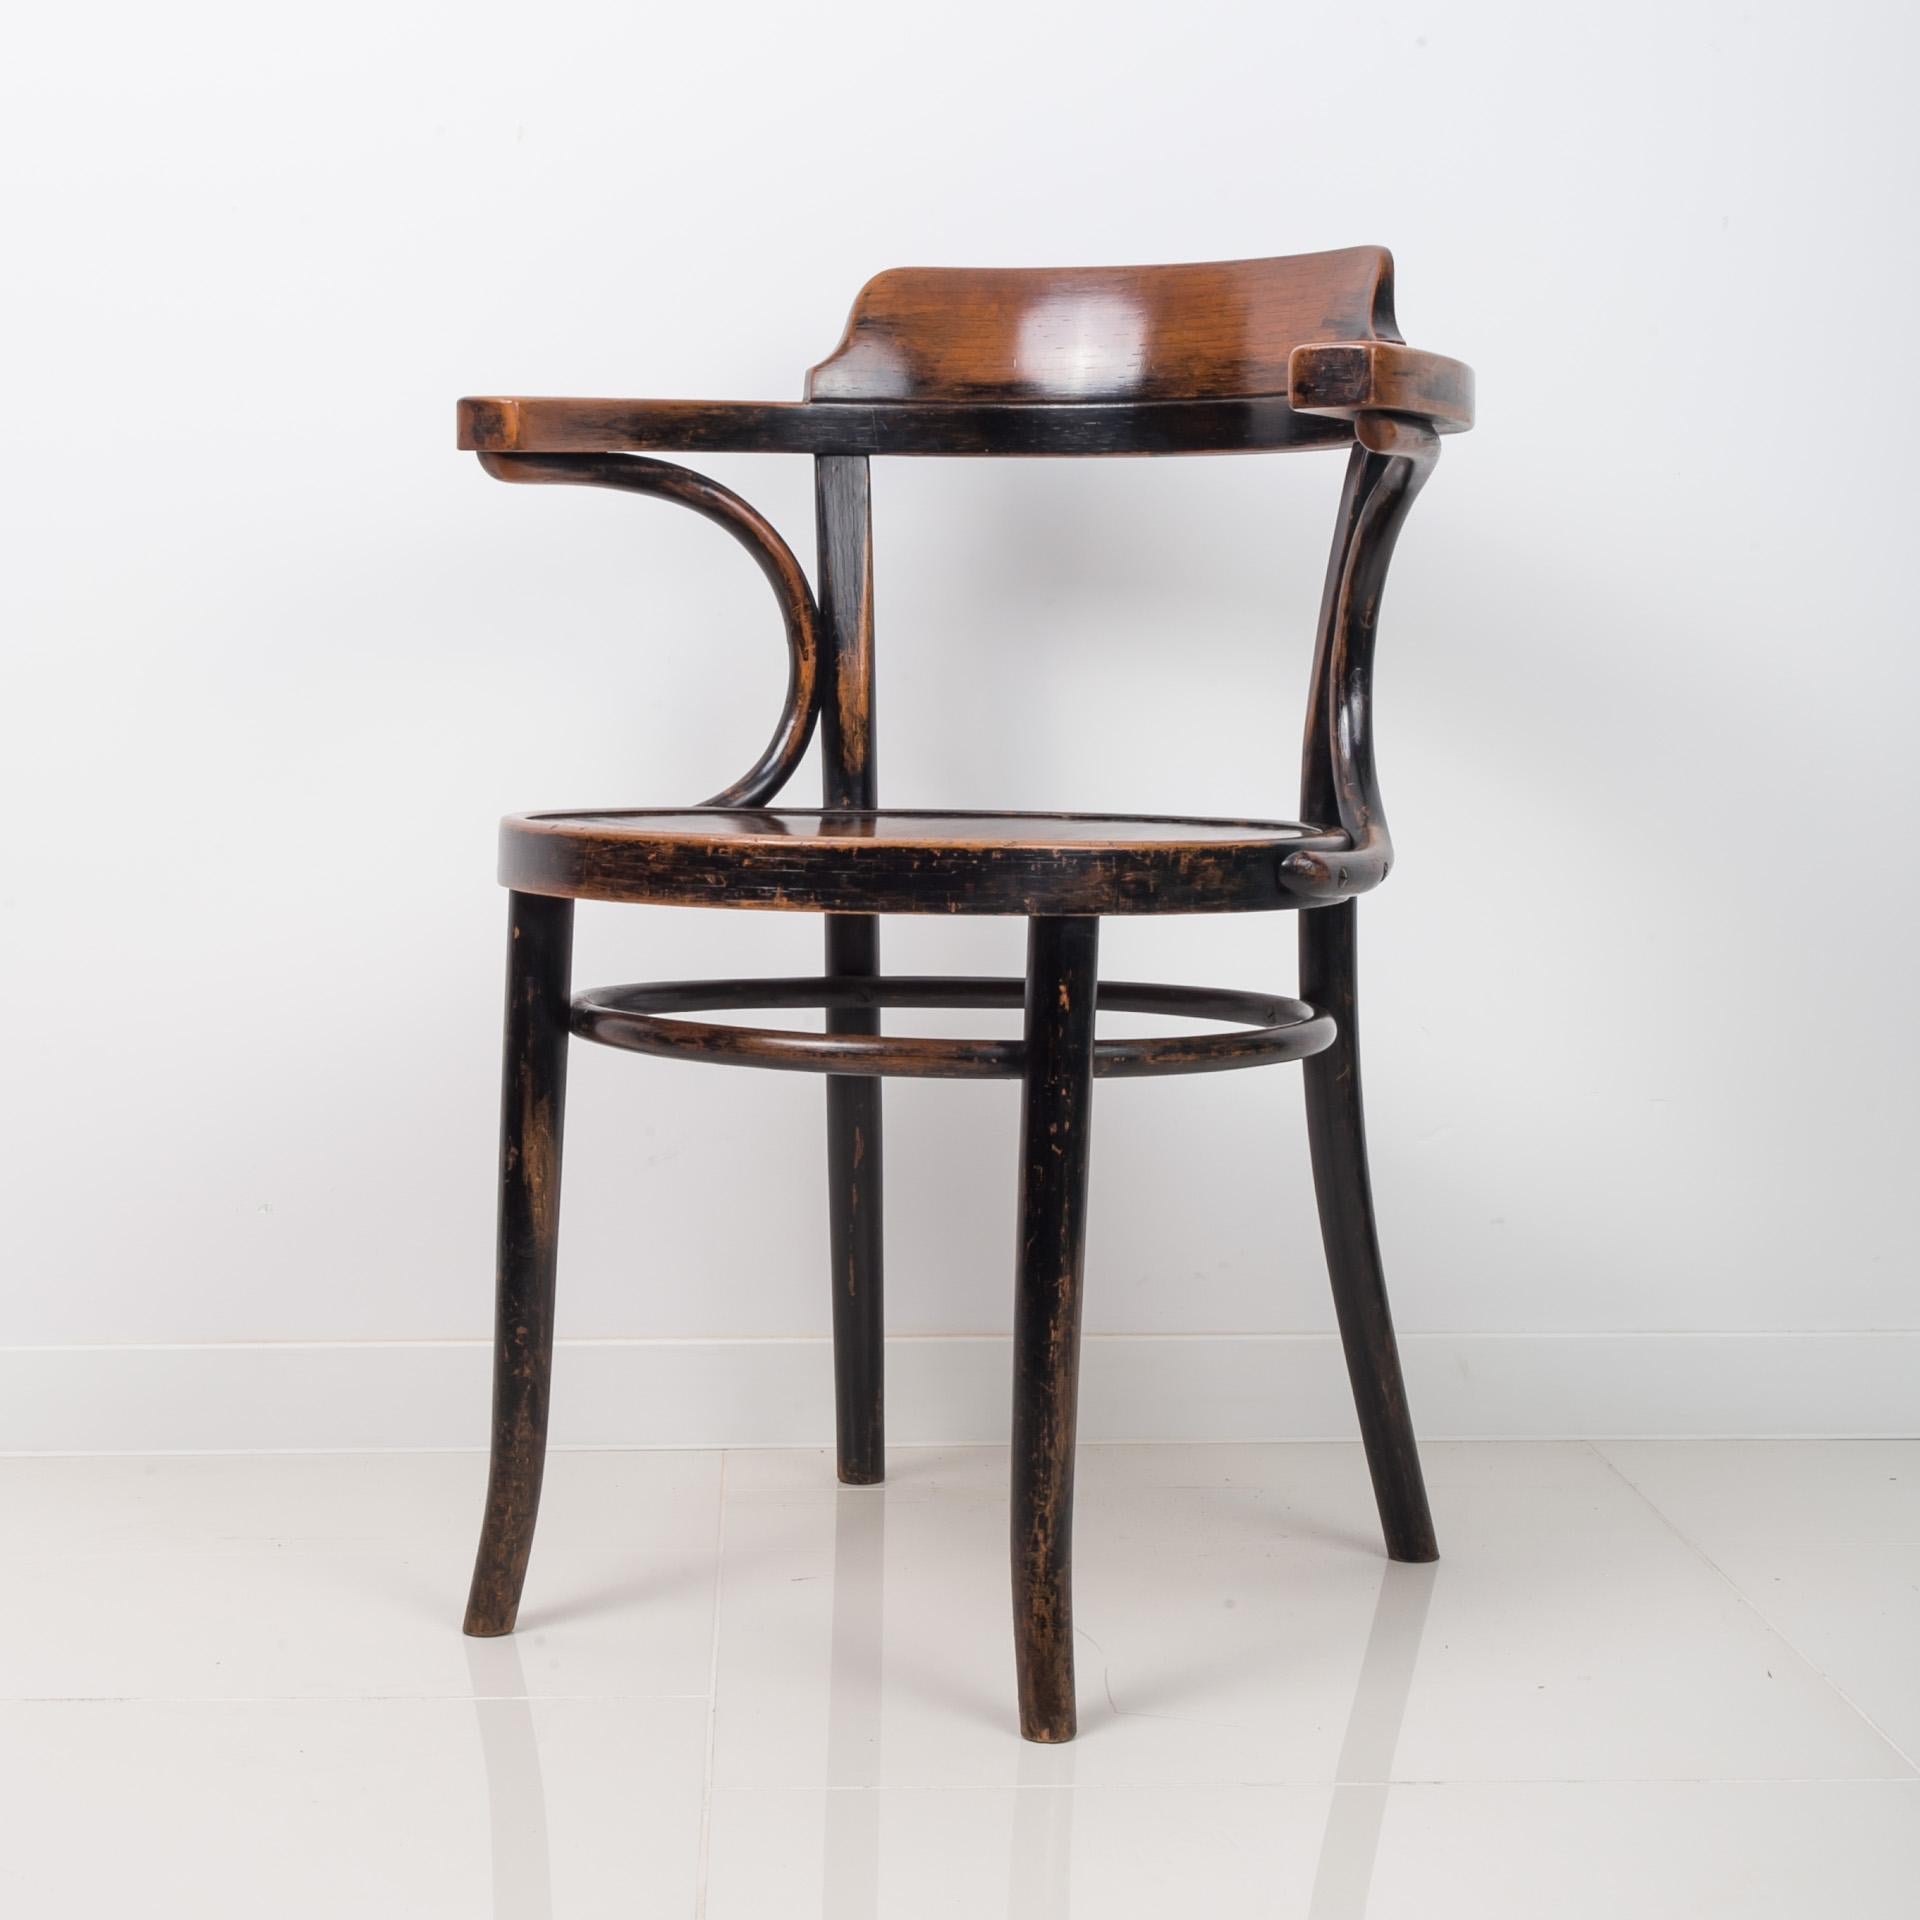 This chair with armrests dates back to the 1920s and was made by famous Thonet Company (original stamp preserved). The piece is made in famous Thonet technique - steamed bentwood. The piece is in beautiful original condition with nice patina, was